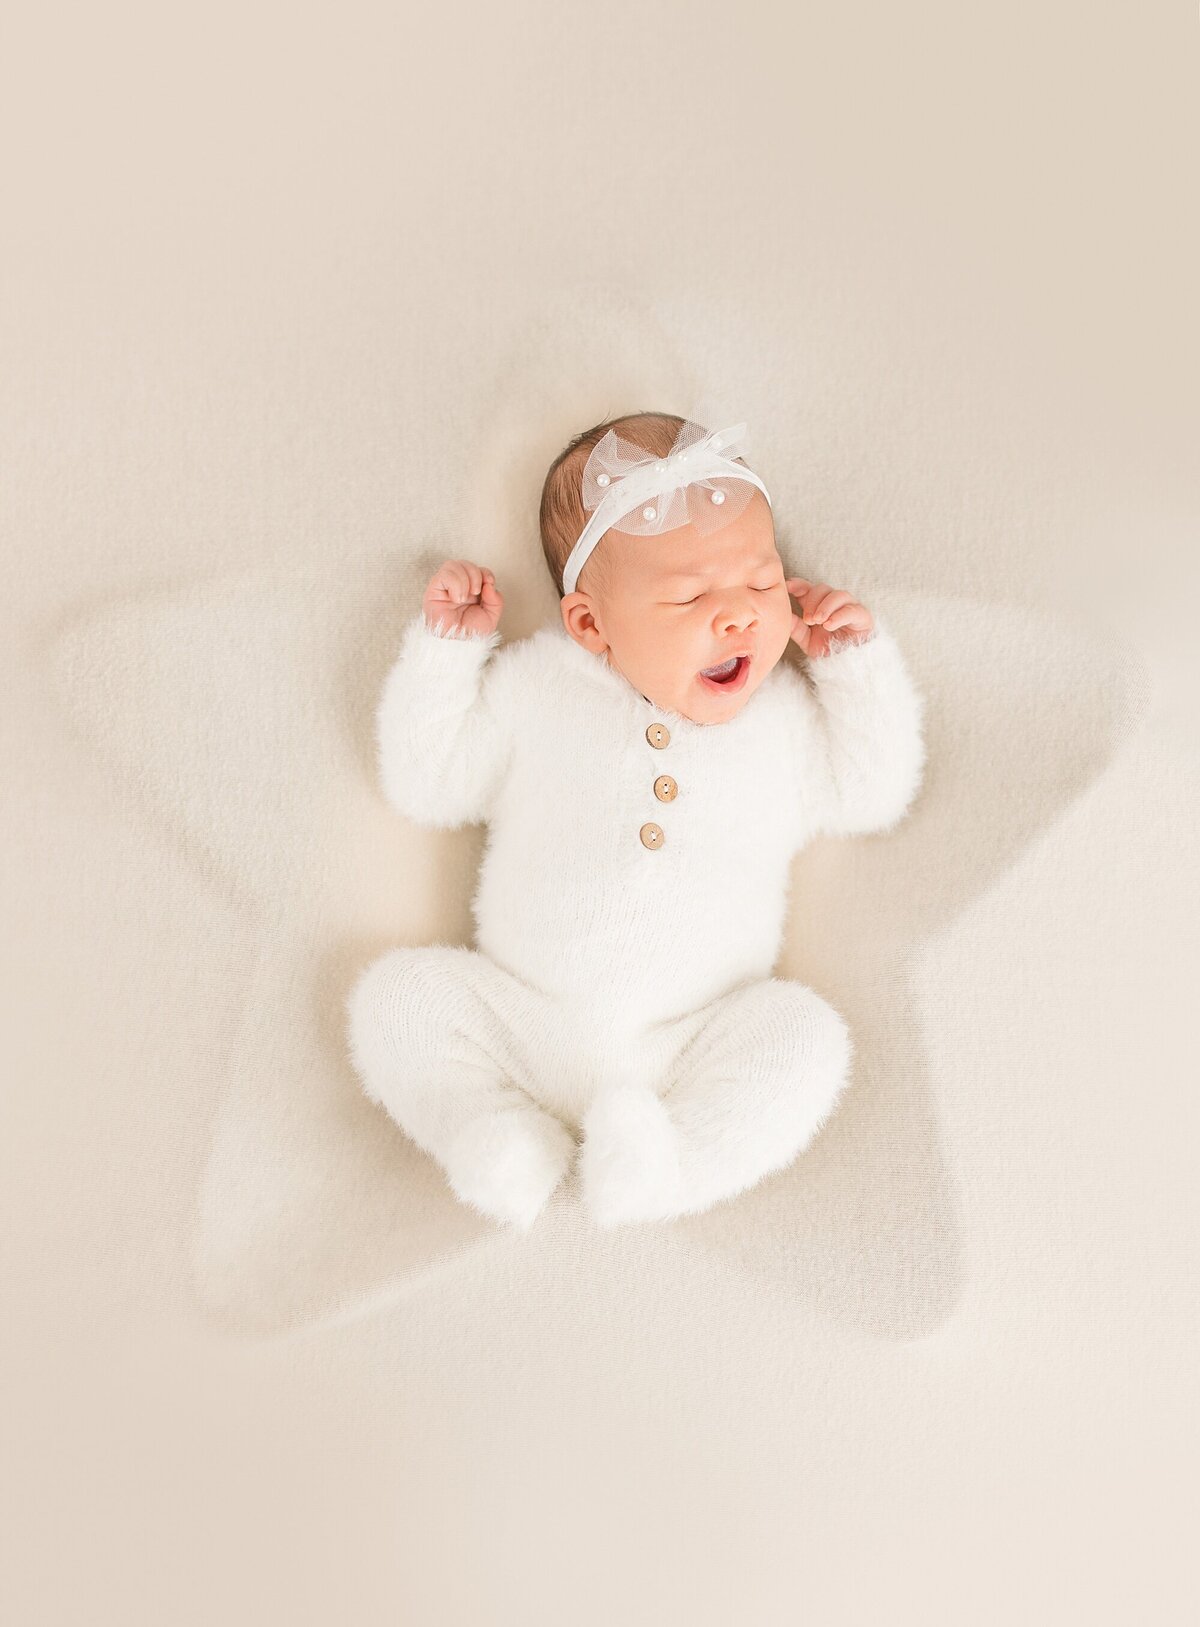 newborn images of a baby yawning in a star shaped bowl